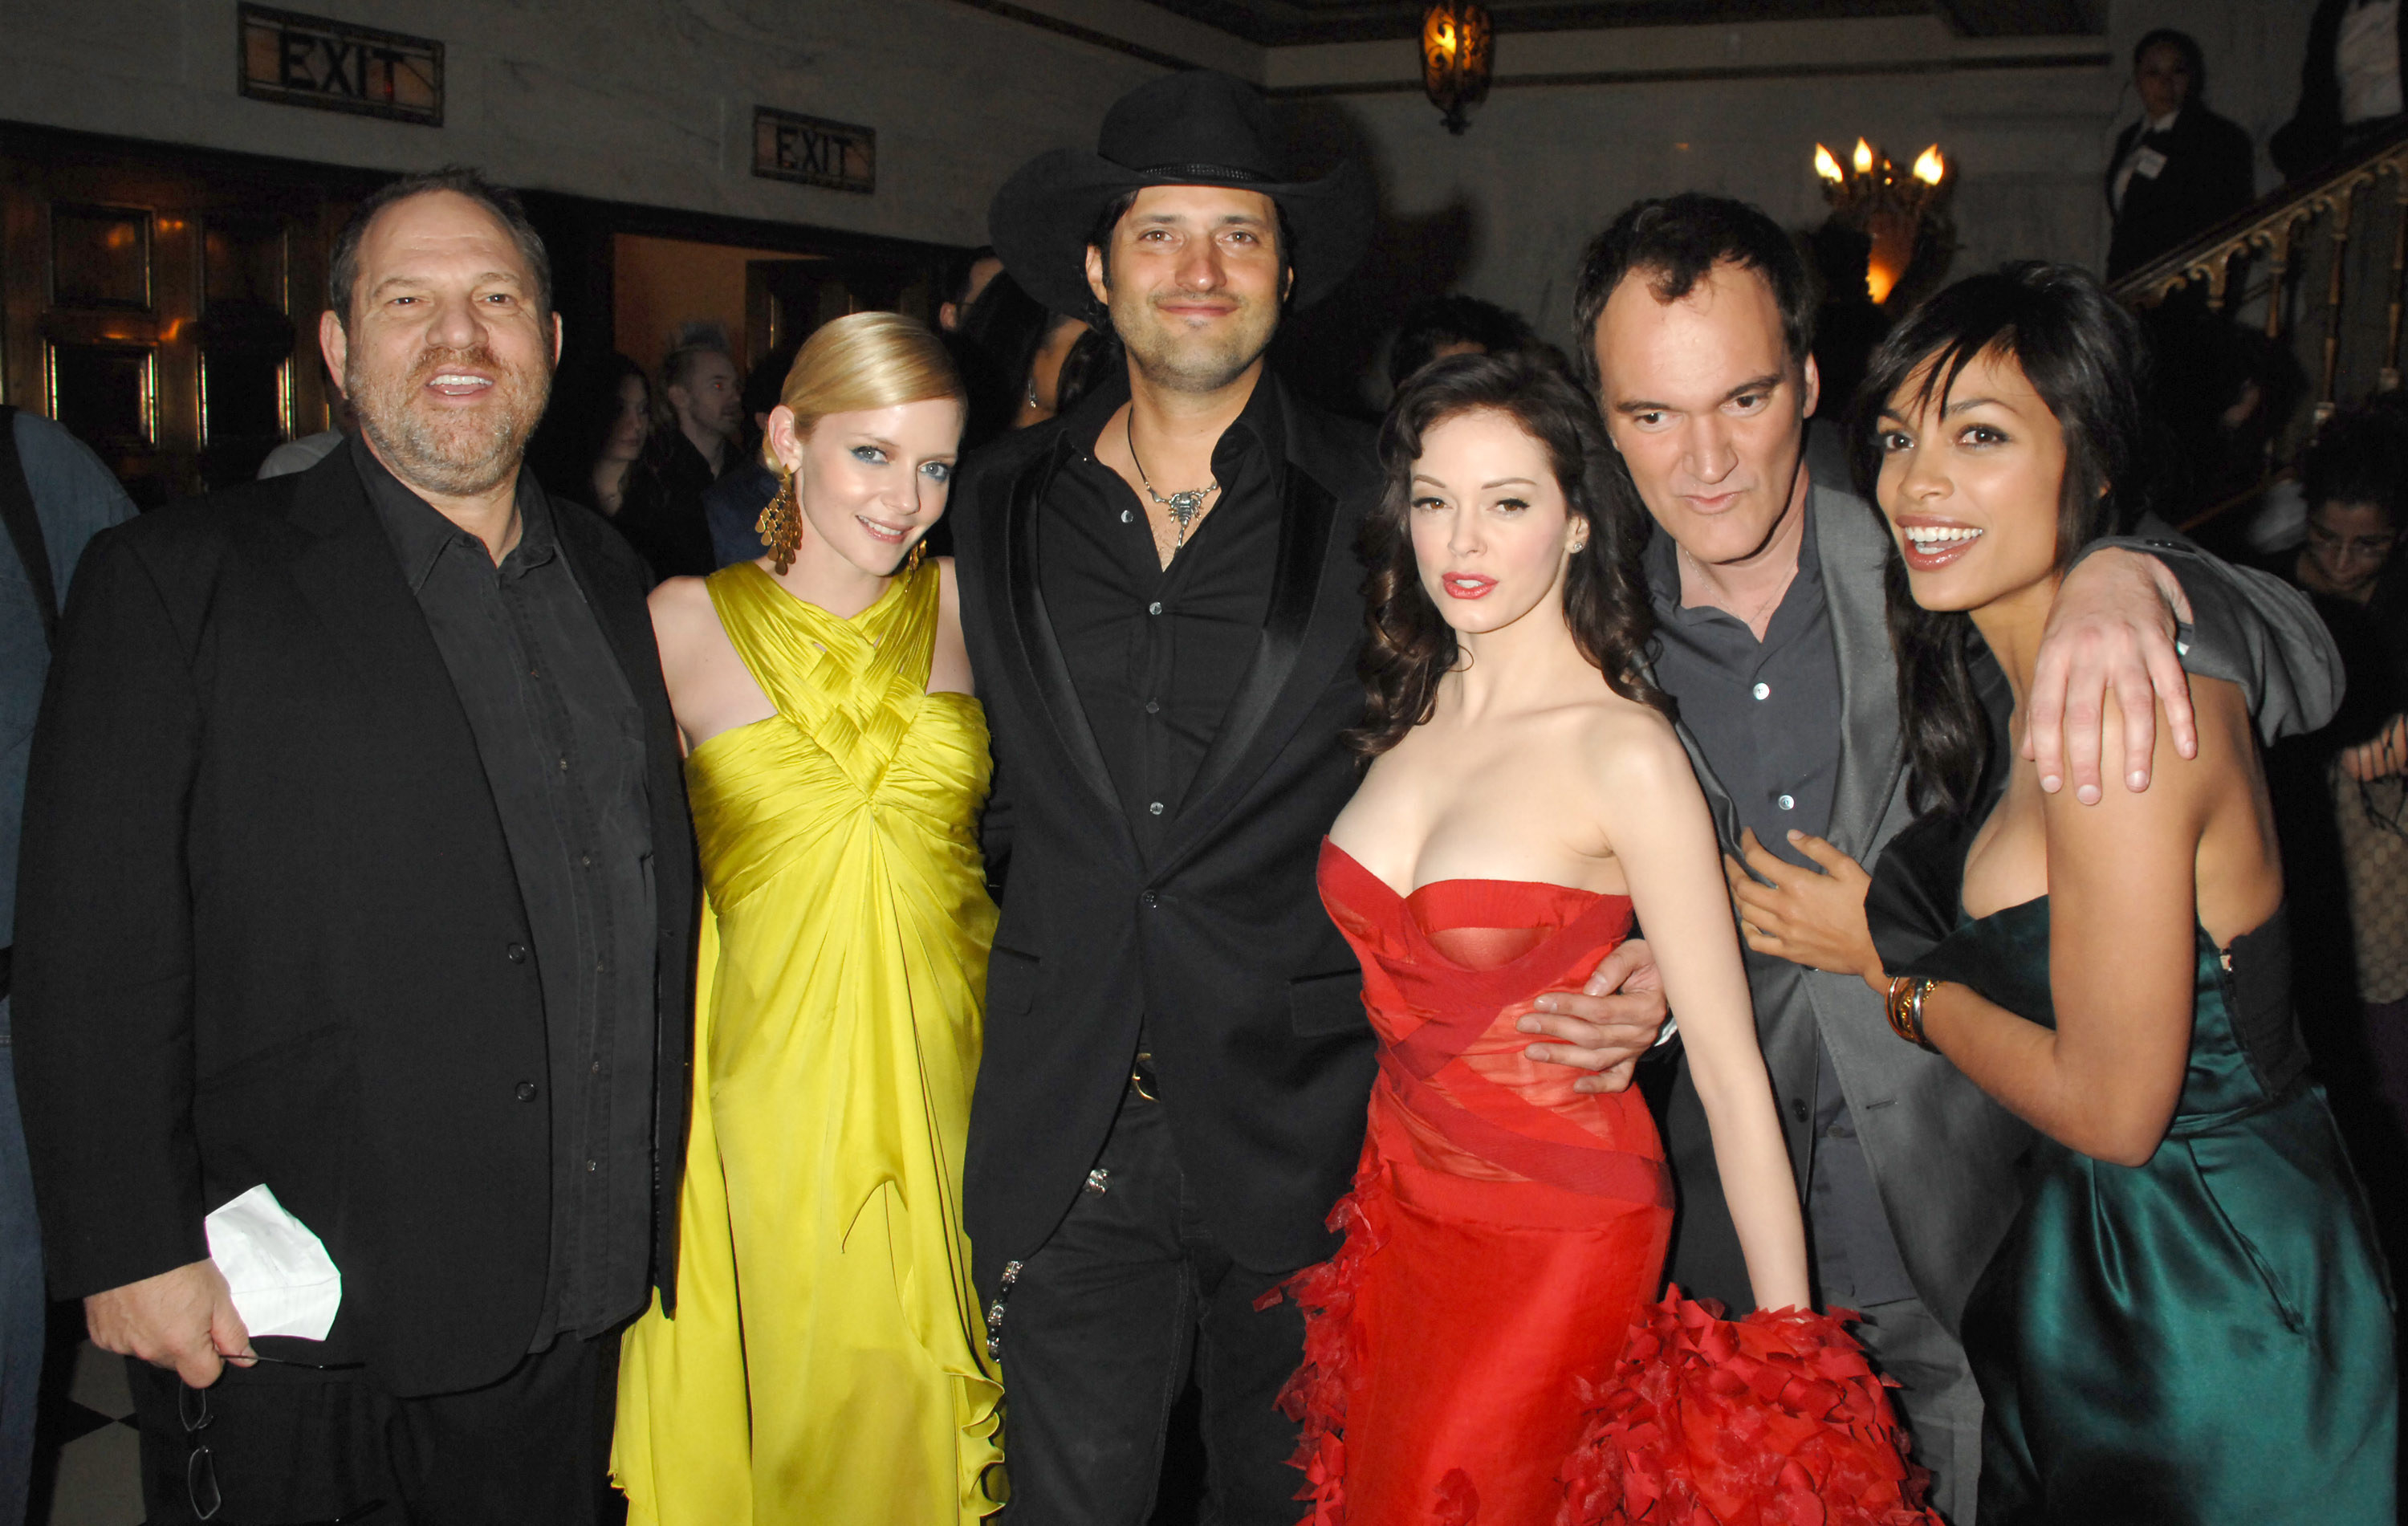 Harvey Weinstein, Marley Shelton, Robert Rodriguez, Rose McGowan, Quentin Tarantino and Rosario Dawson pose for a photo at a premiere